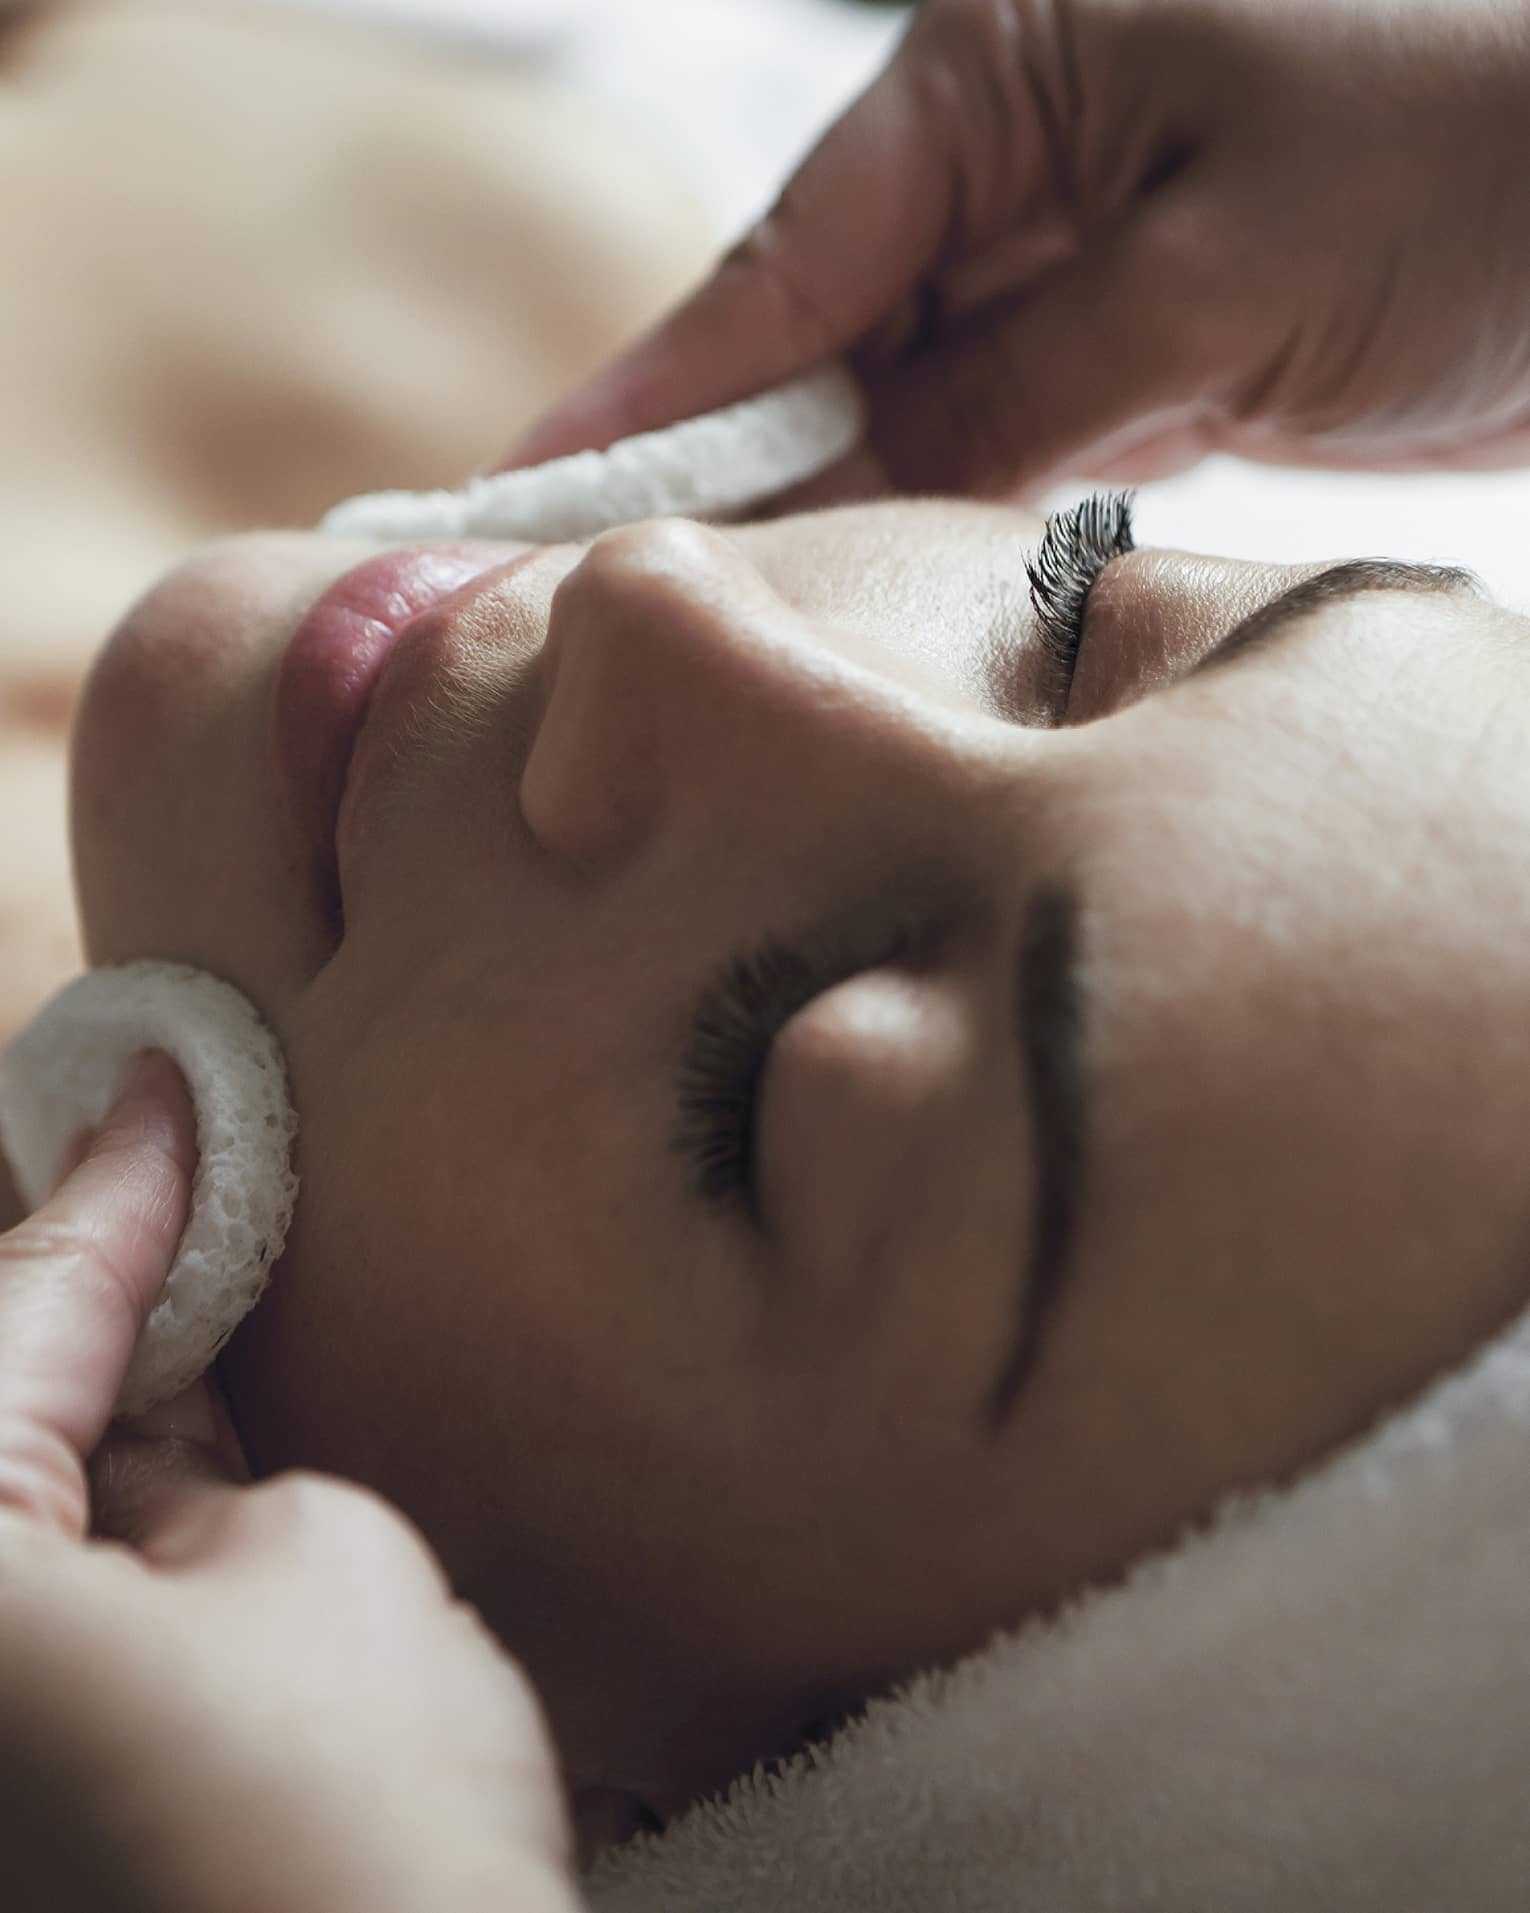 A detail of hands rubbing a sponge on a woman's face as she lies on a massage table with her eyes closed and hair wrapped up in a white towel